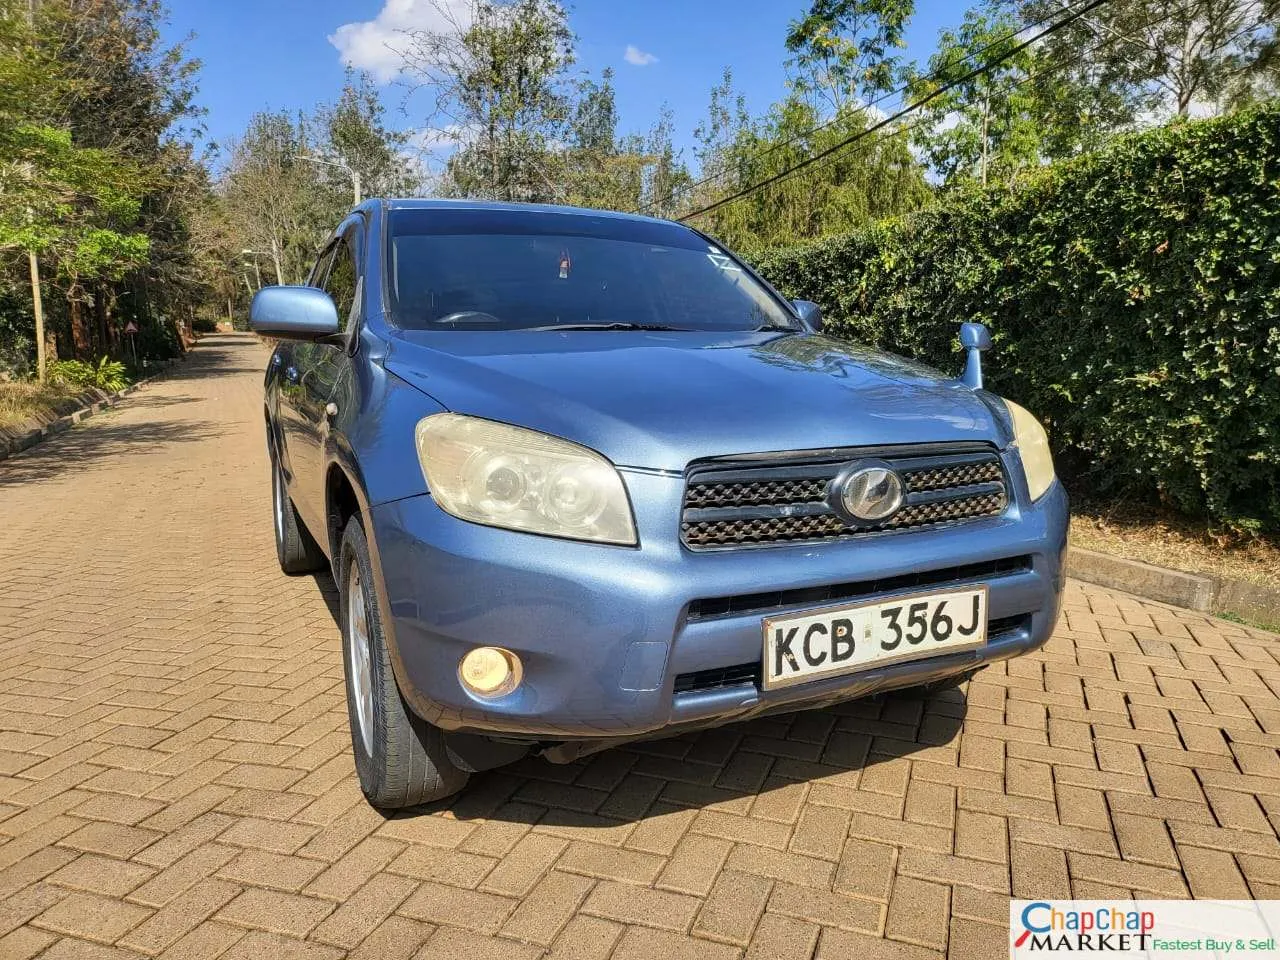 Toyota RAV4 kenya CHEAPEST You Pay 30% Deposit Trade in OK Toyota RAV4 for sale in kenya hire purchase installments EXCLUSIVE